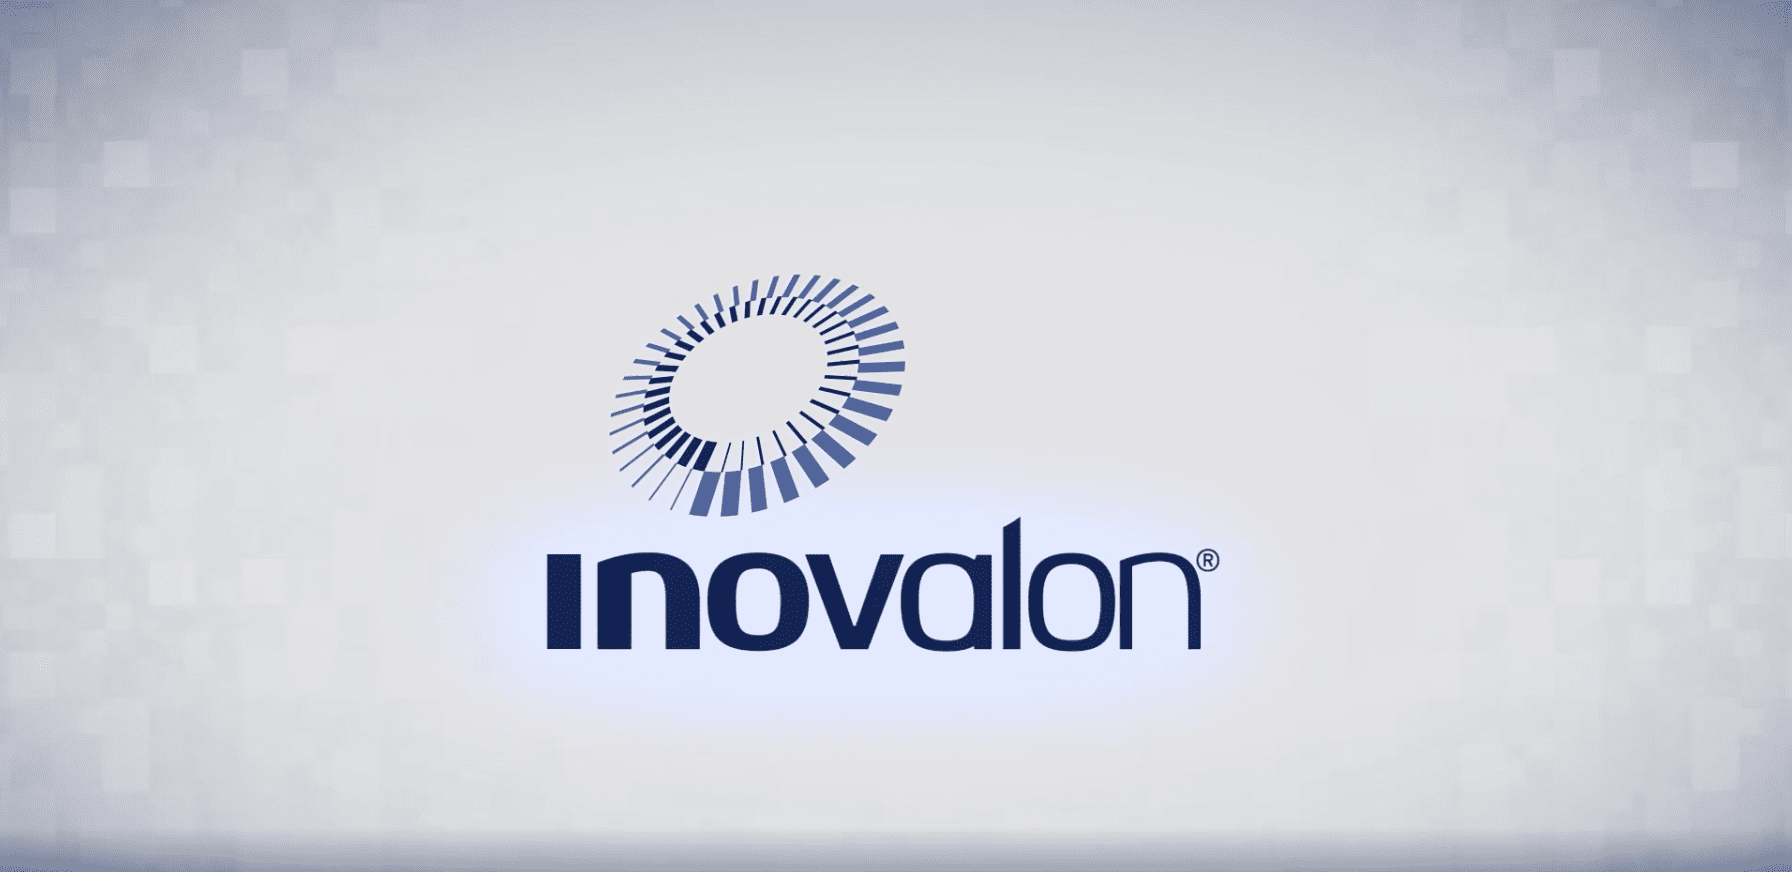 Inovalon & AWS to Develop AI/ML Solutions for Healthcare